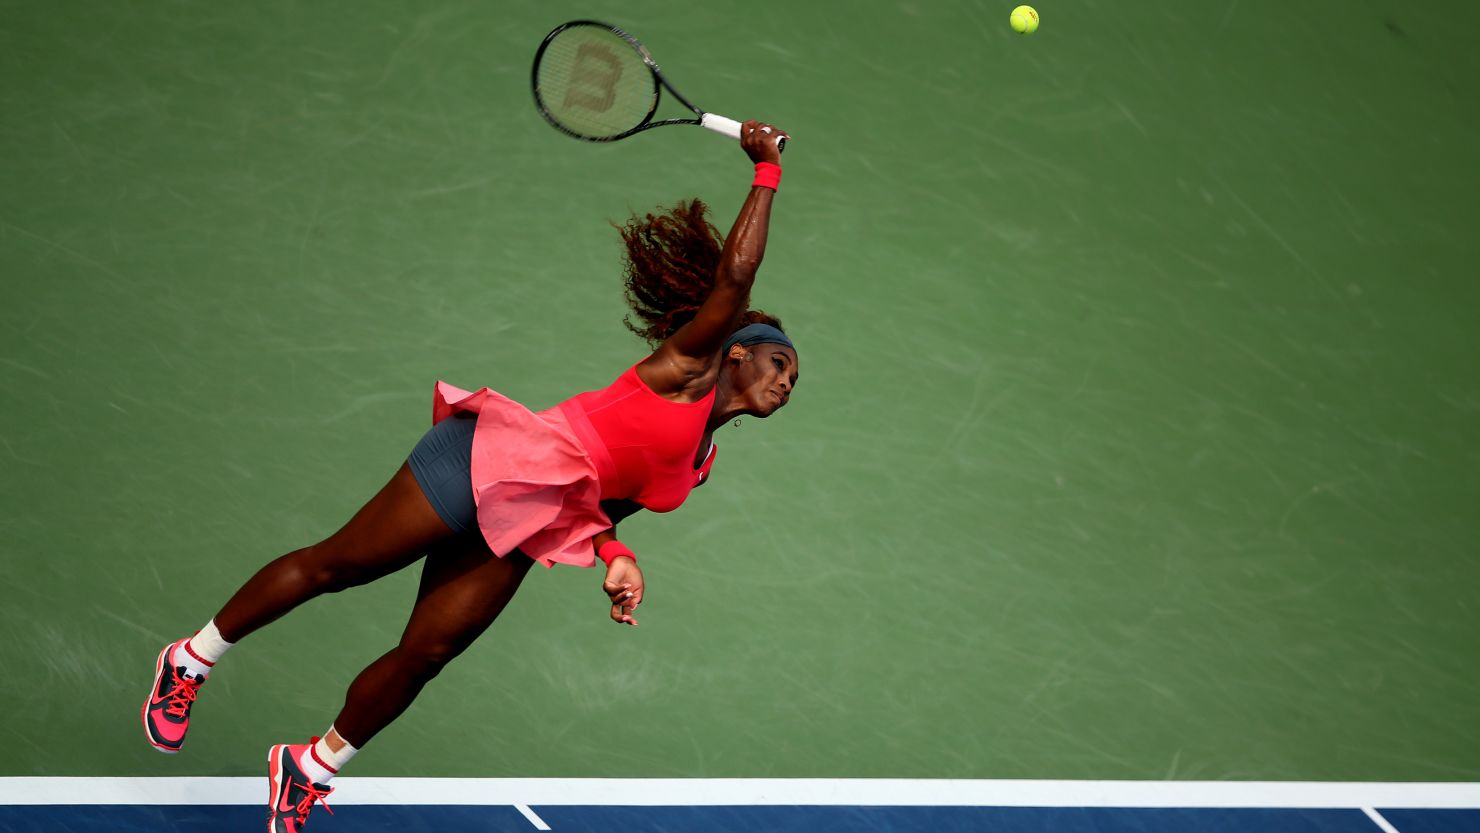 Serena Williams' serve worked against Sloane Stephens and she moved into the quarterfinals in New York. 